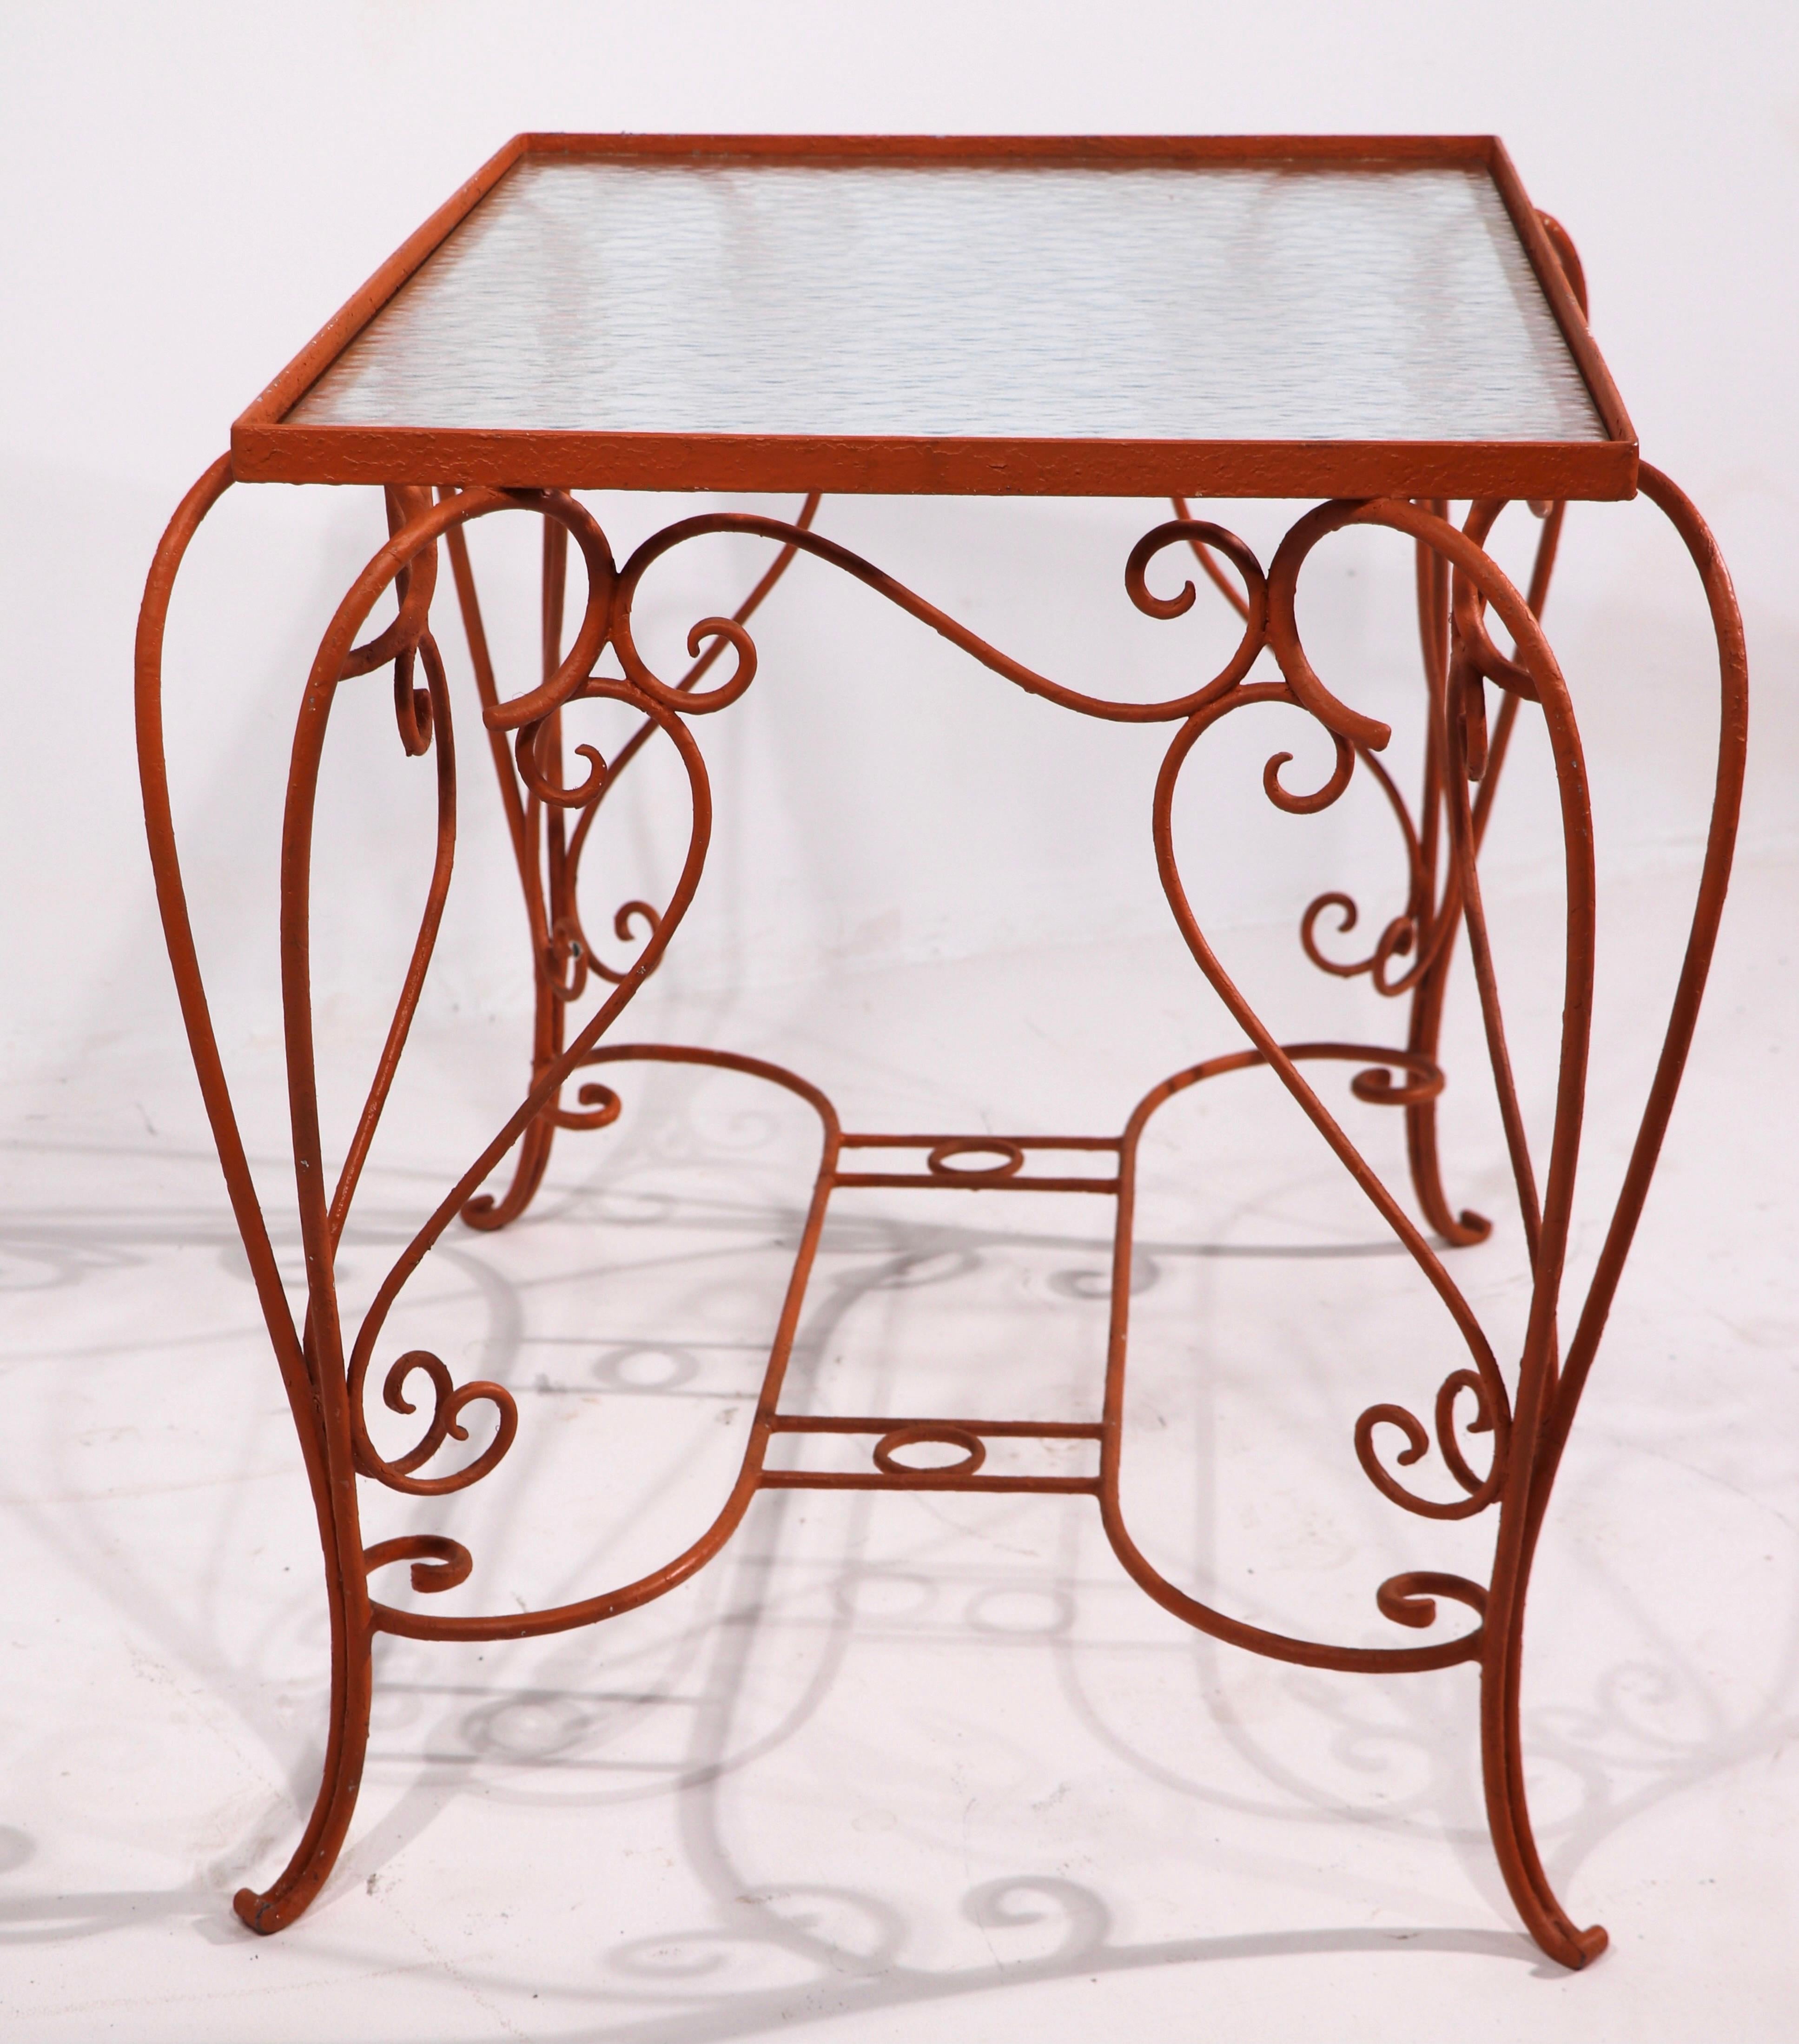 Ornate Wrought Iron Garden Patio Poolside Table with Textured Glass top 4